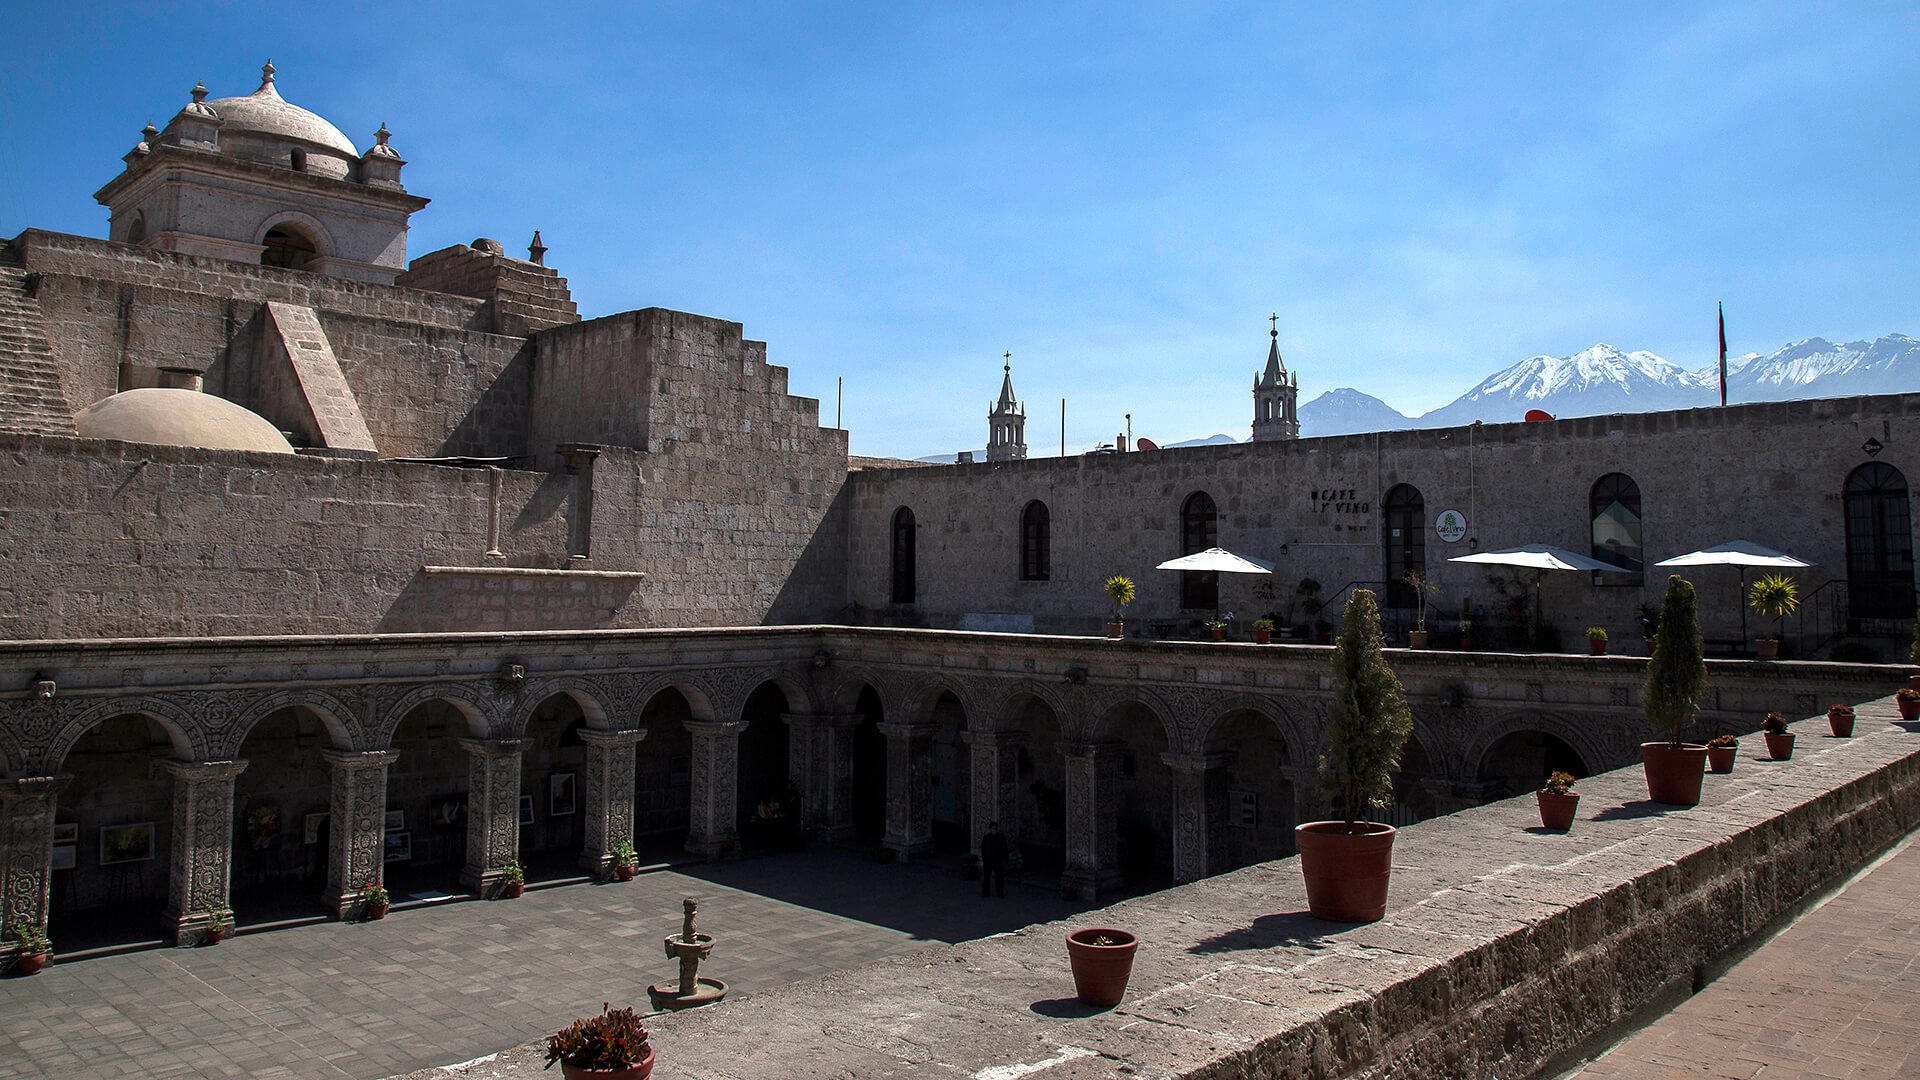 11Claustros de la Compañía is a touristic site in Arequipa where you can find different shops in a historical building | RESPONSible Travel Peru